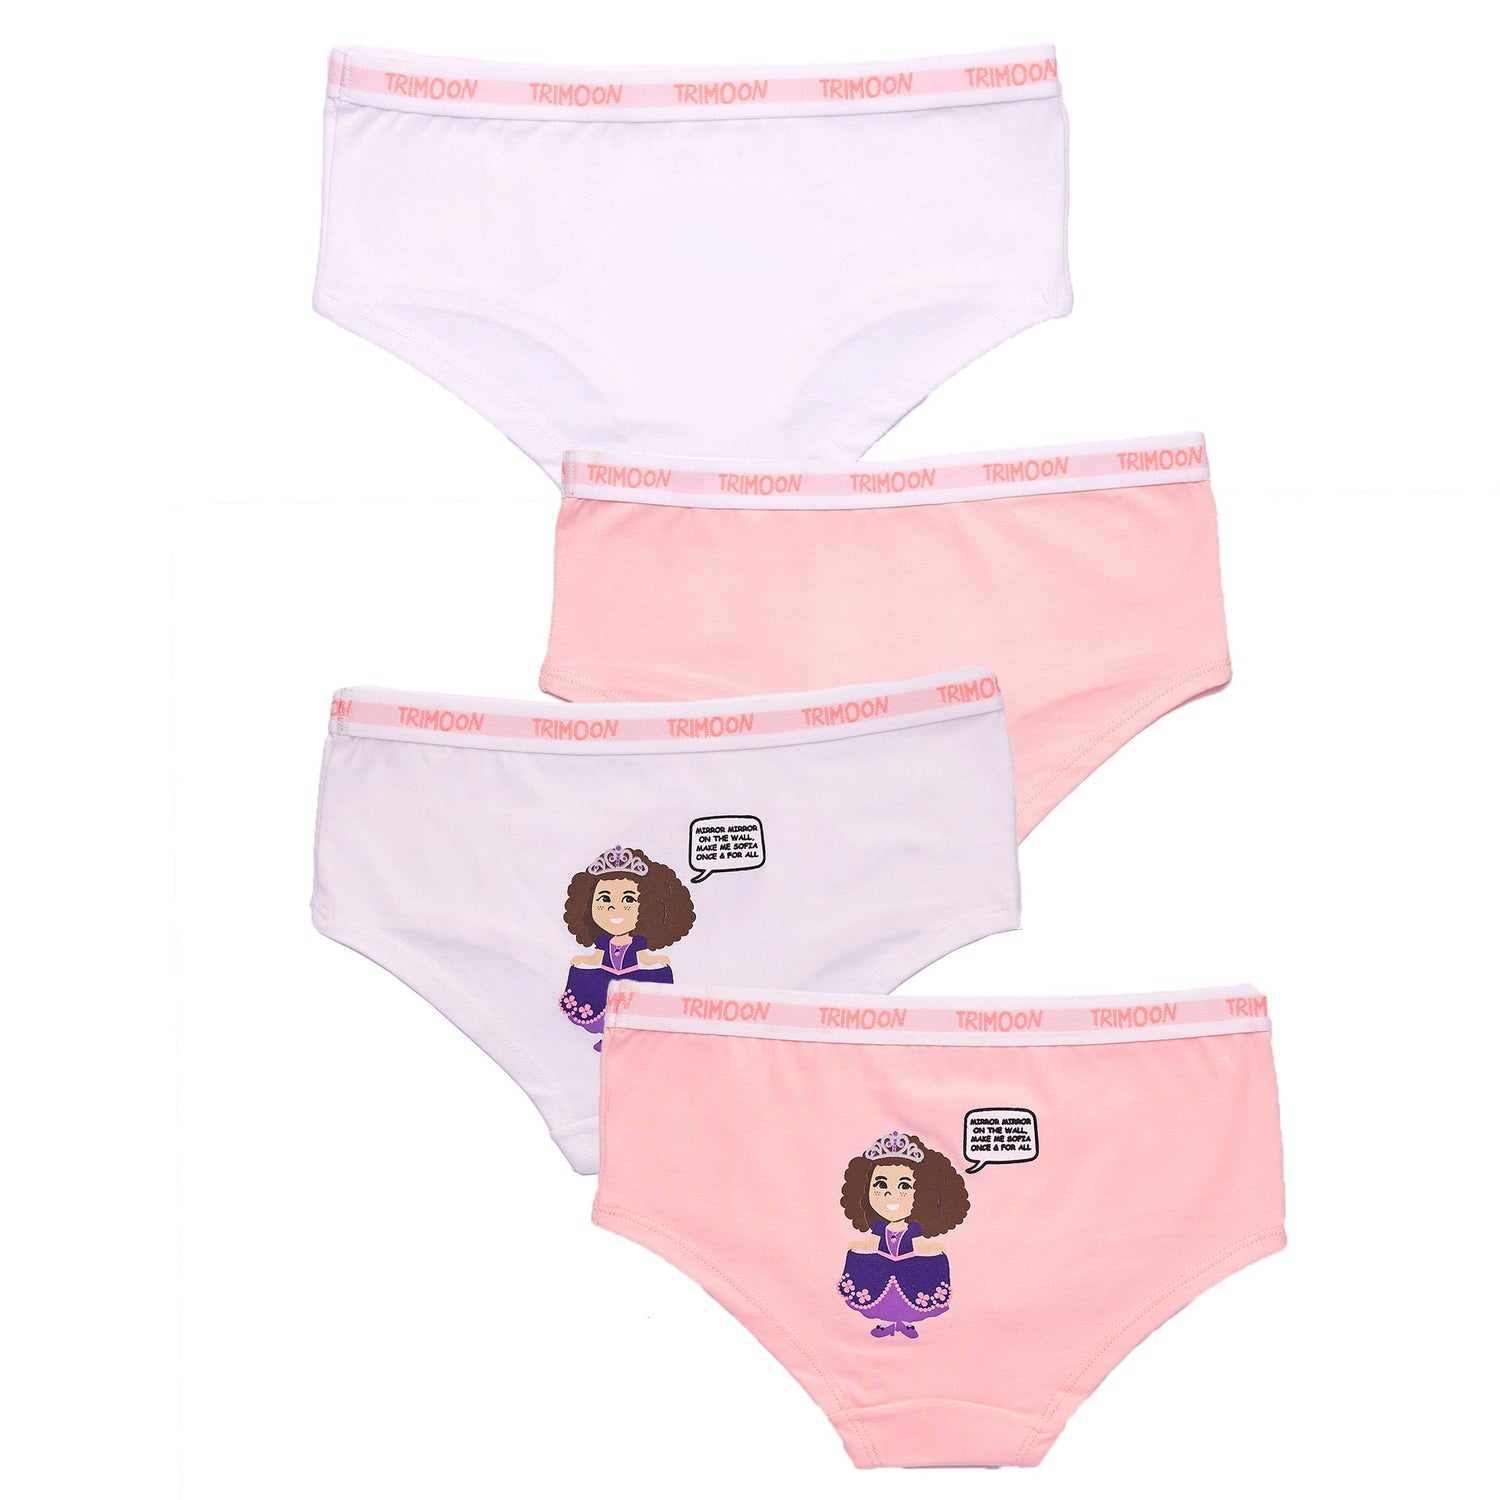 Trimoon Pack of 4 Brand New Hipsters For Girls - The Princess - mymadstore.com